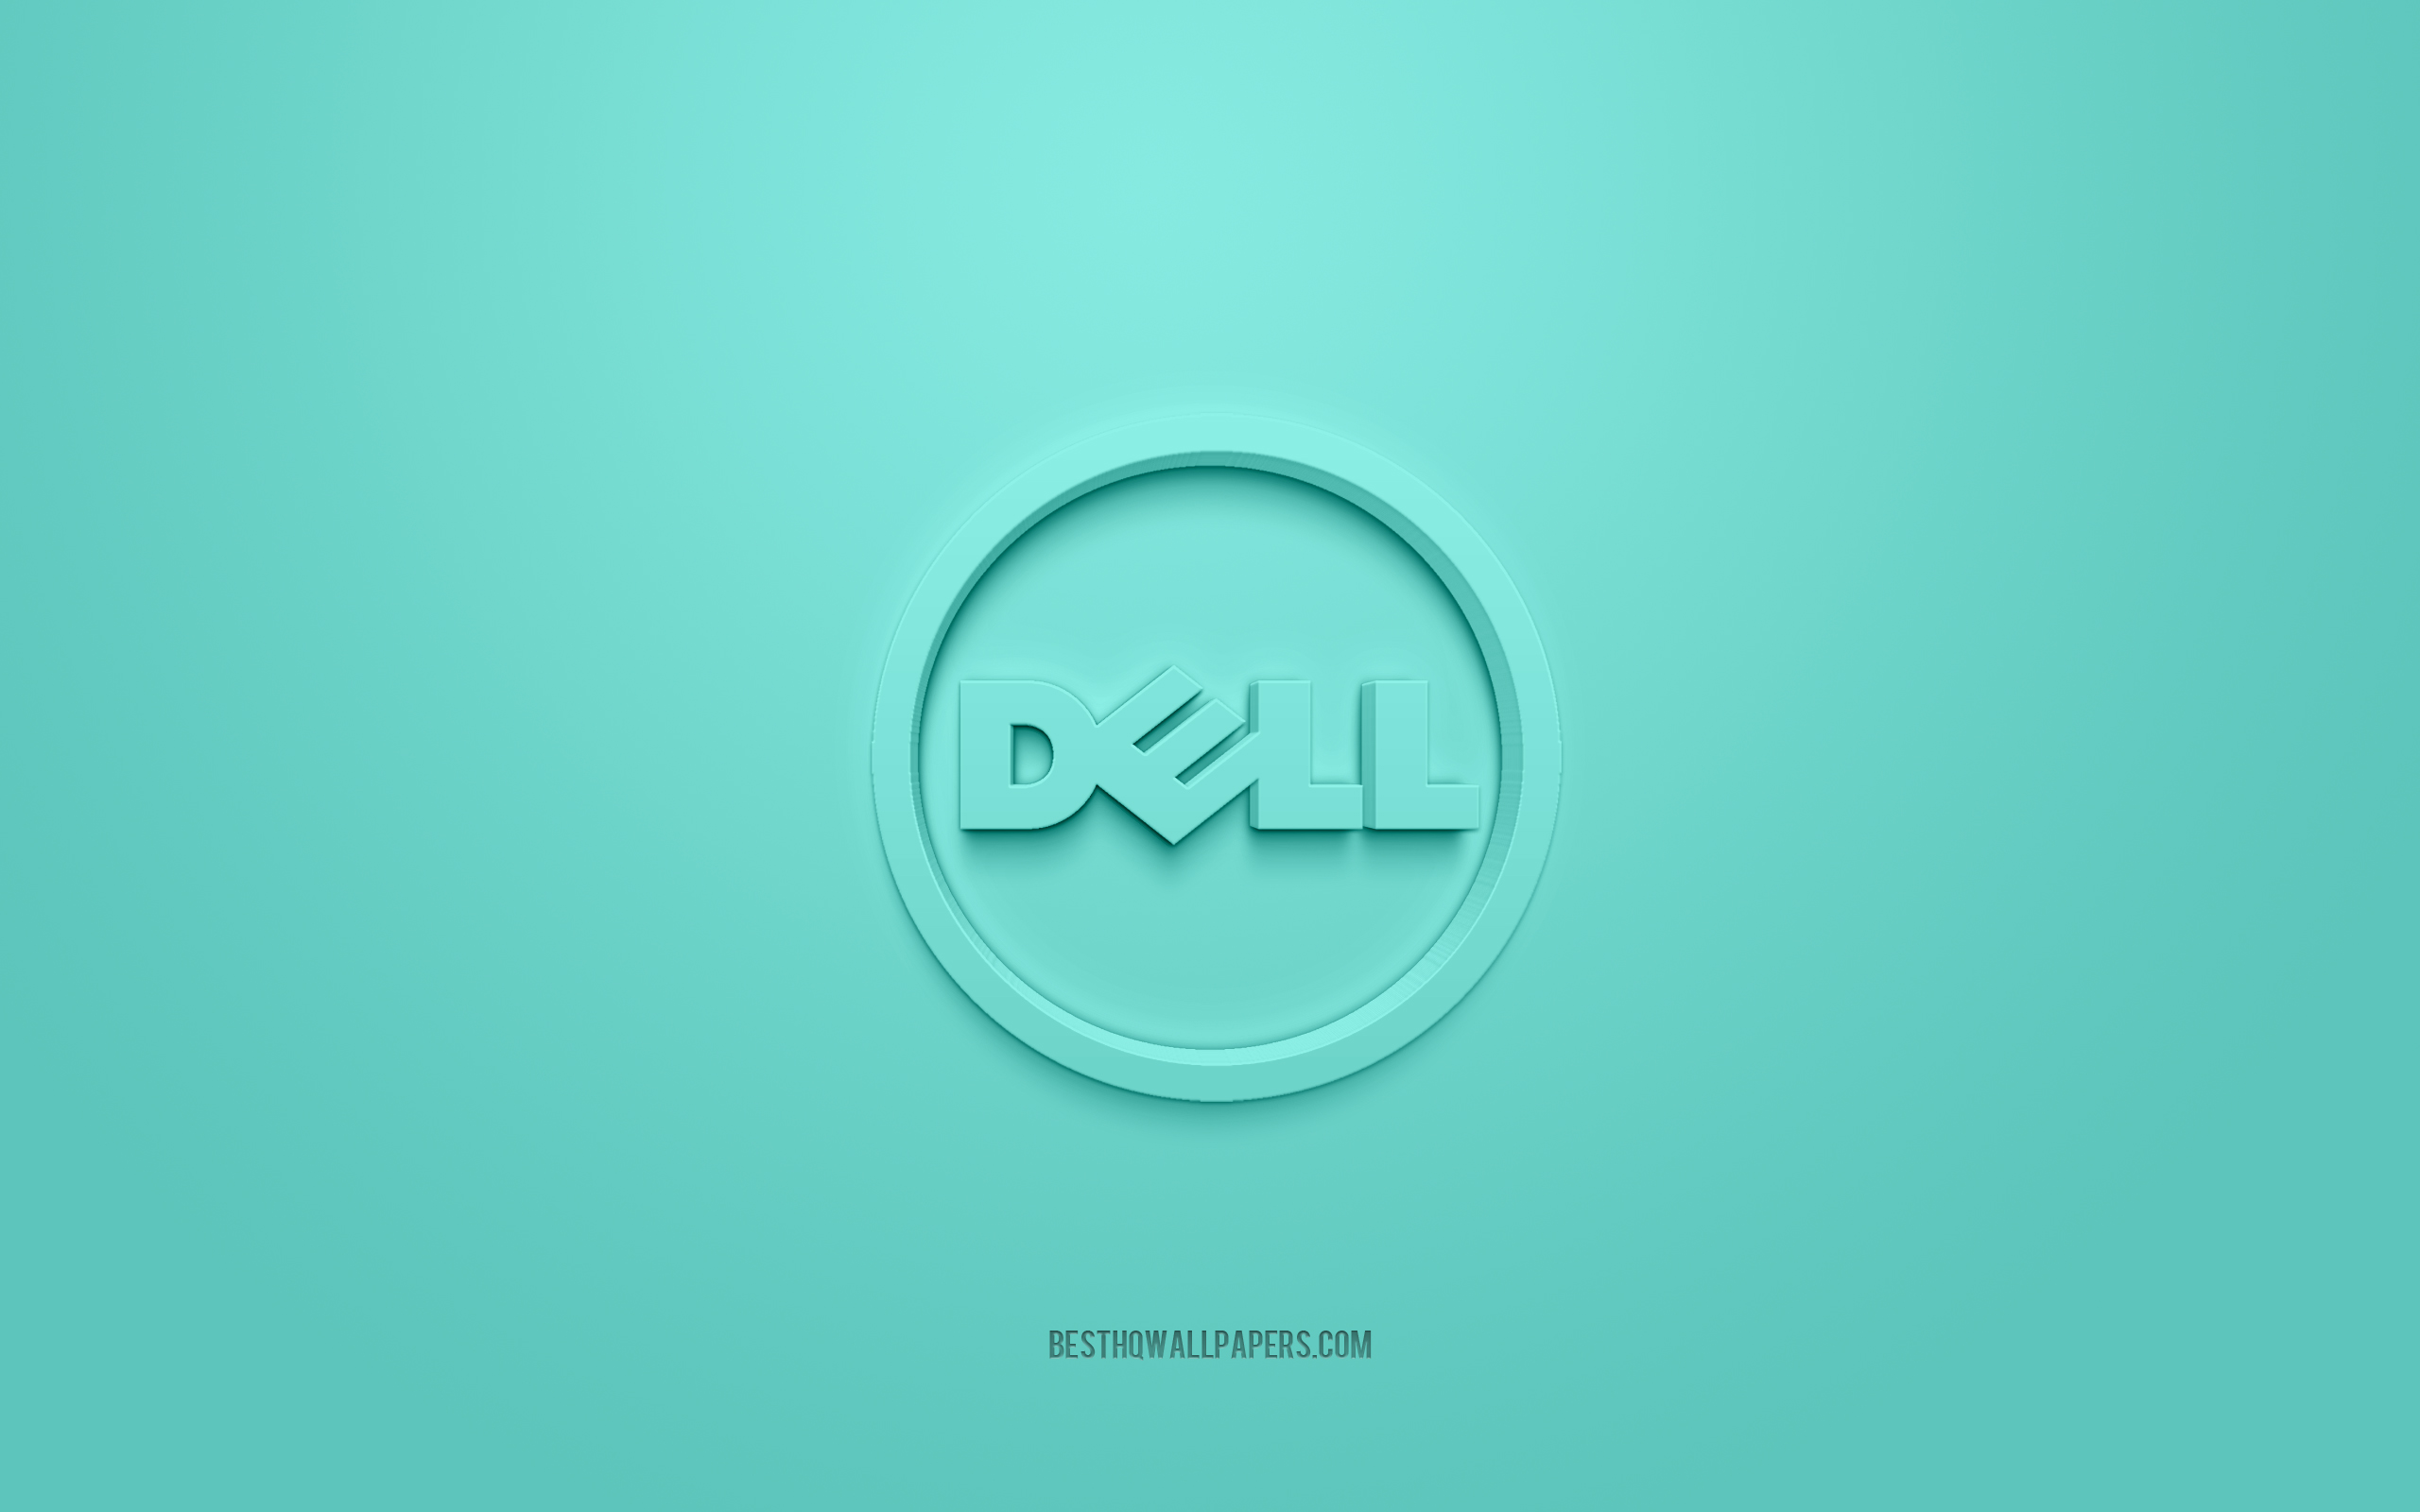 Download wallpaper Dell round logo, turquoise background, Dell 3D logo, 3D art, Dell, brands logo, Dell logo, turquoise 3D Dell logo for desktop with resolution 2560x1600. High Quality HD picture wallpaper